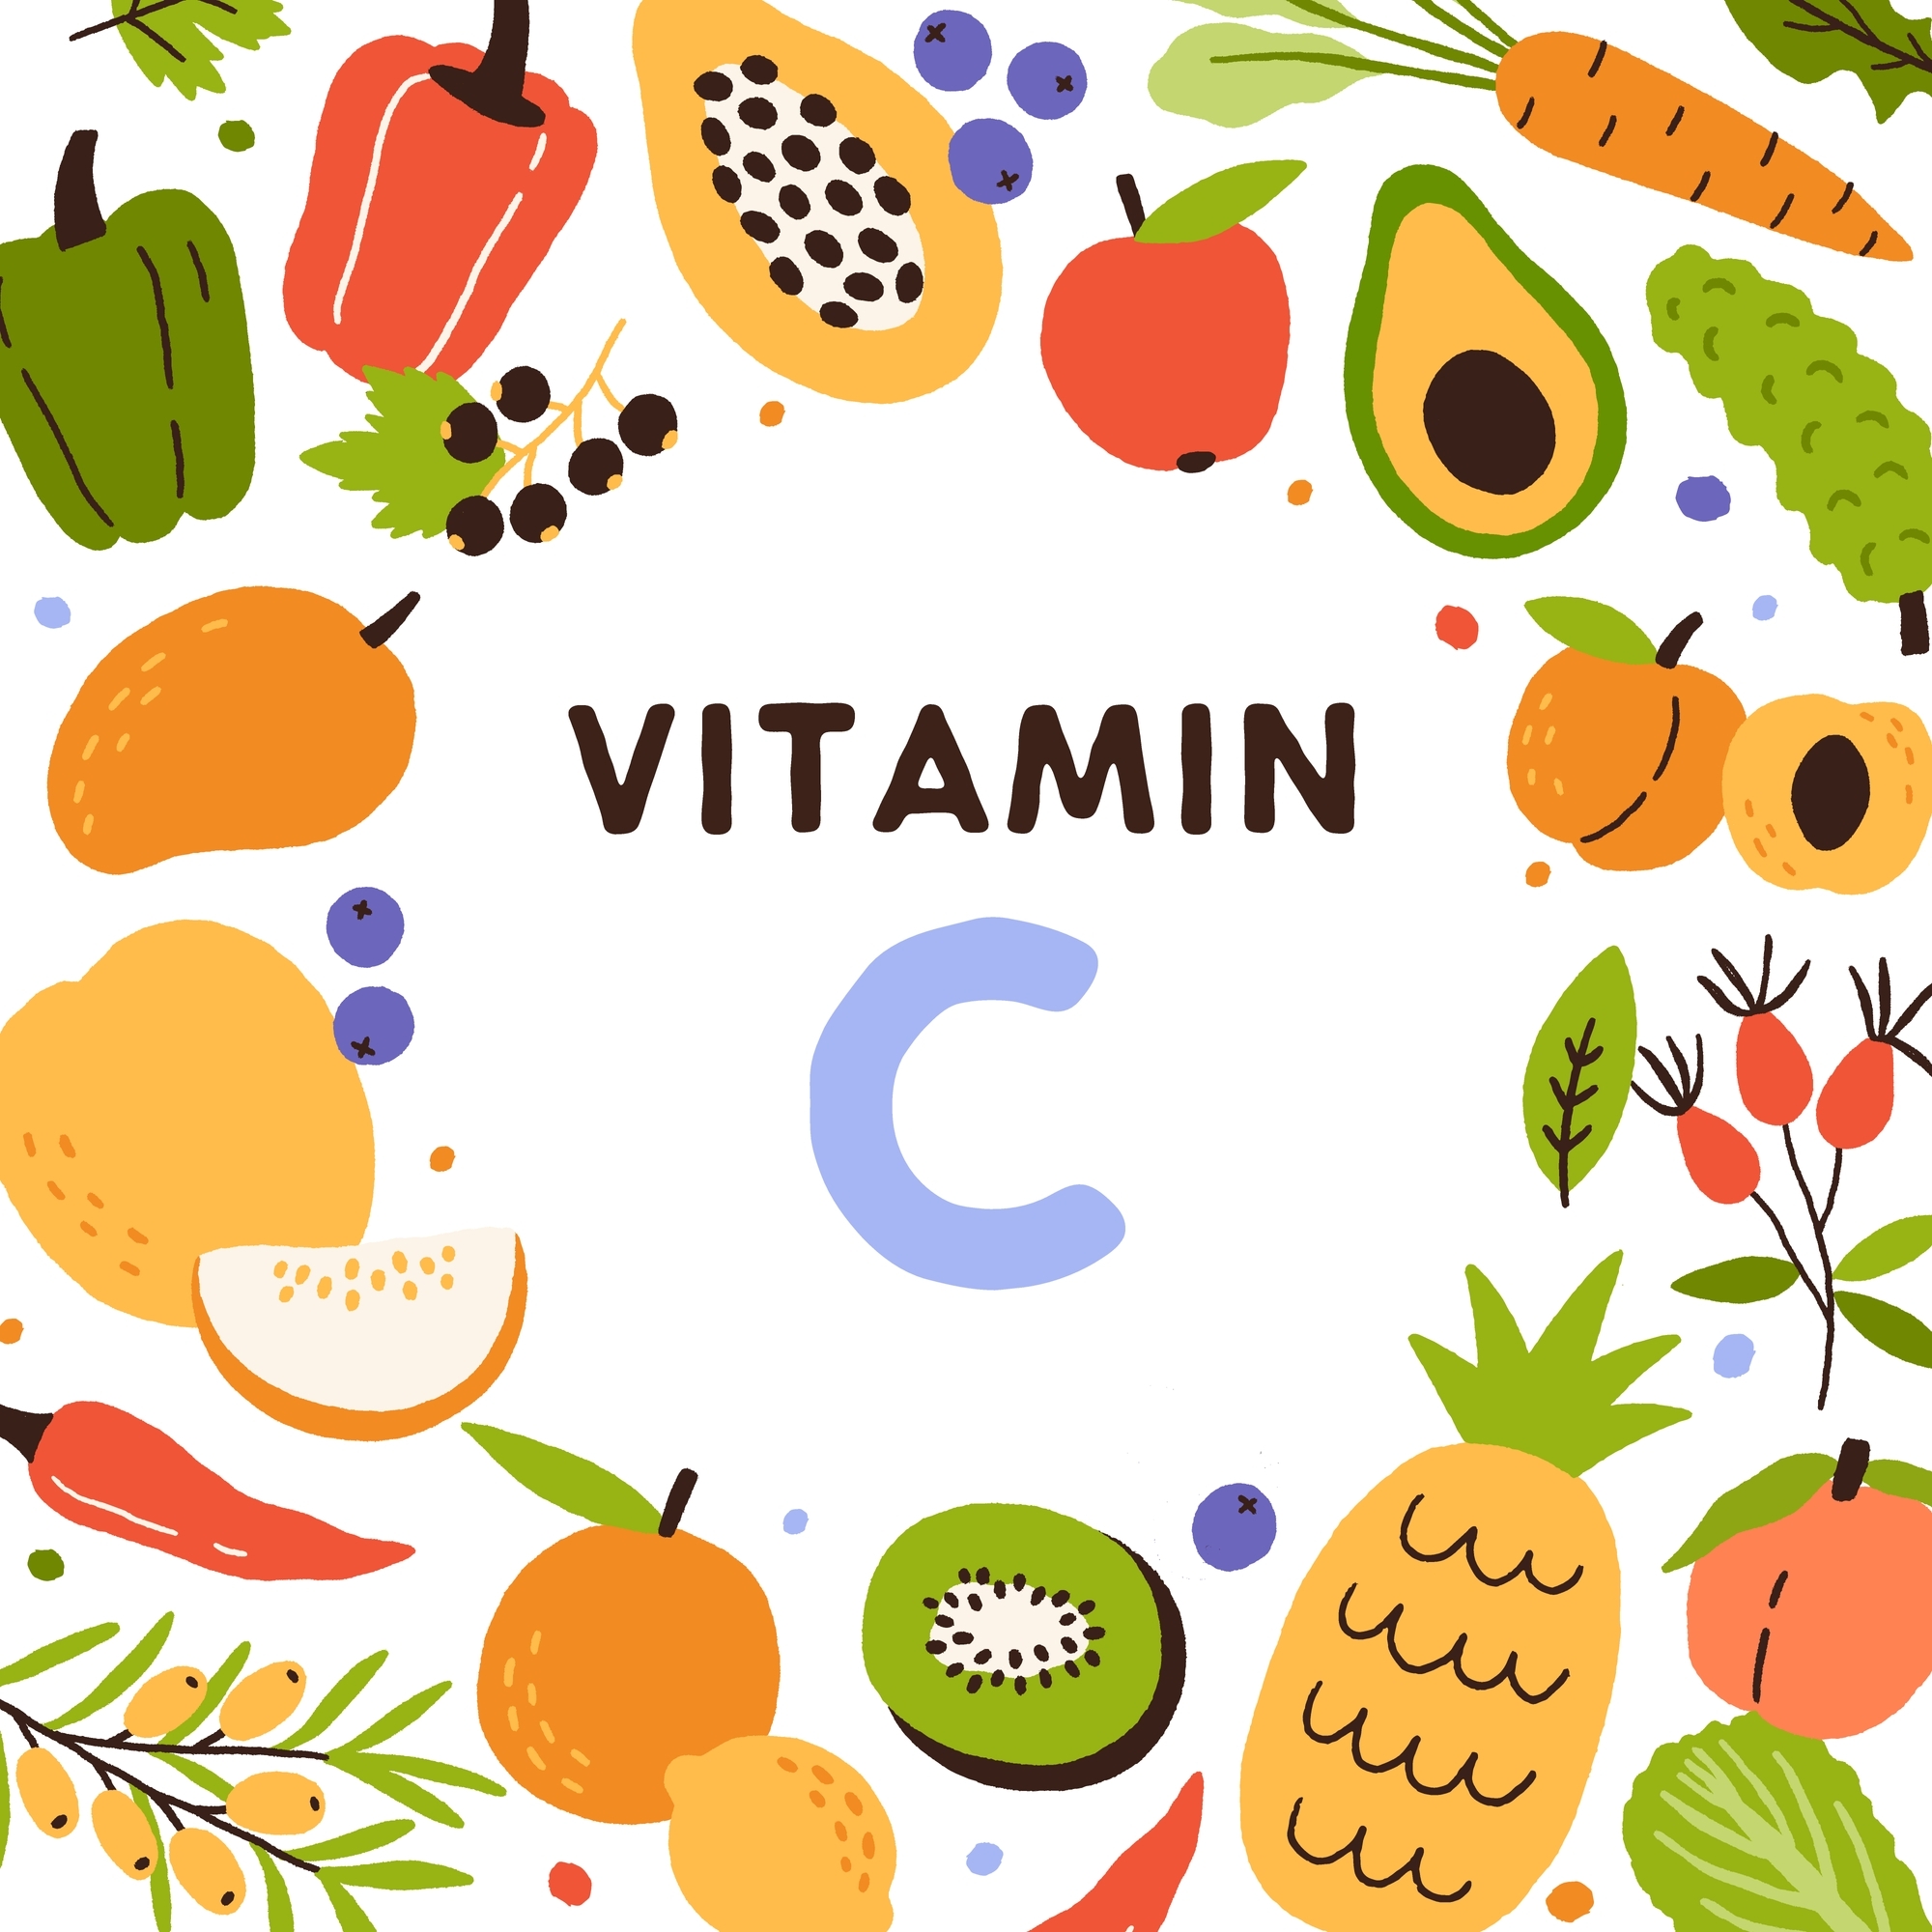 diet,fruits and vegetables,citrus fruits,orange juice,vitamin c supplements,water soluble vitamin,other fruits,vitamin c rich fruits,store vitamin,three servings,